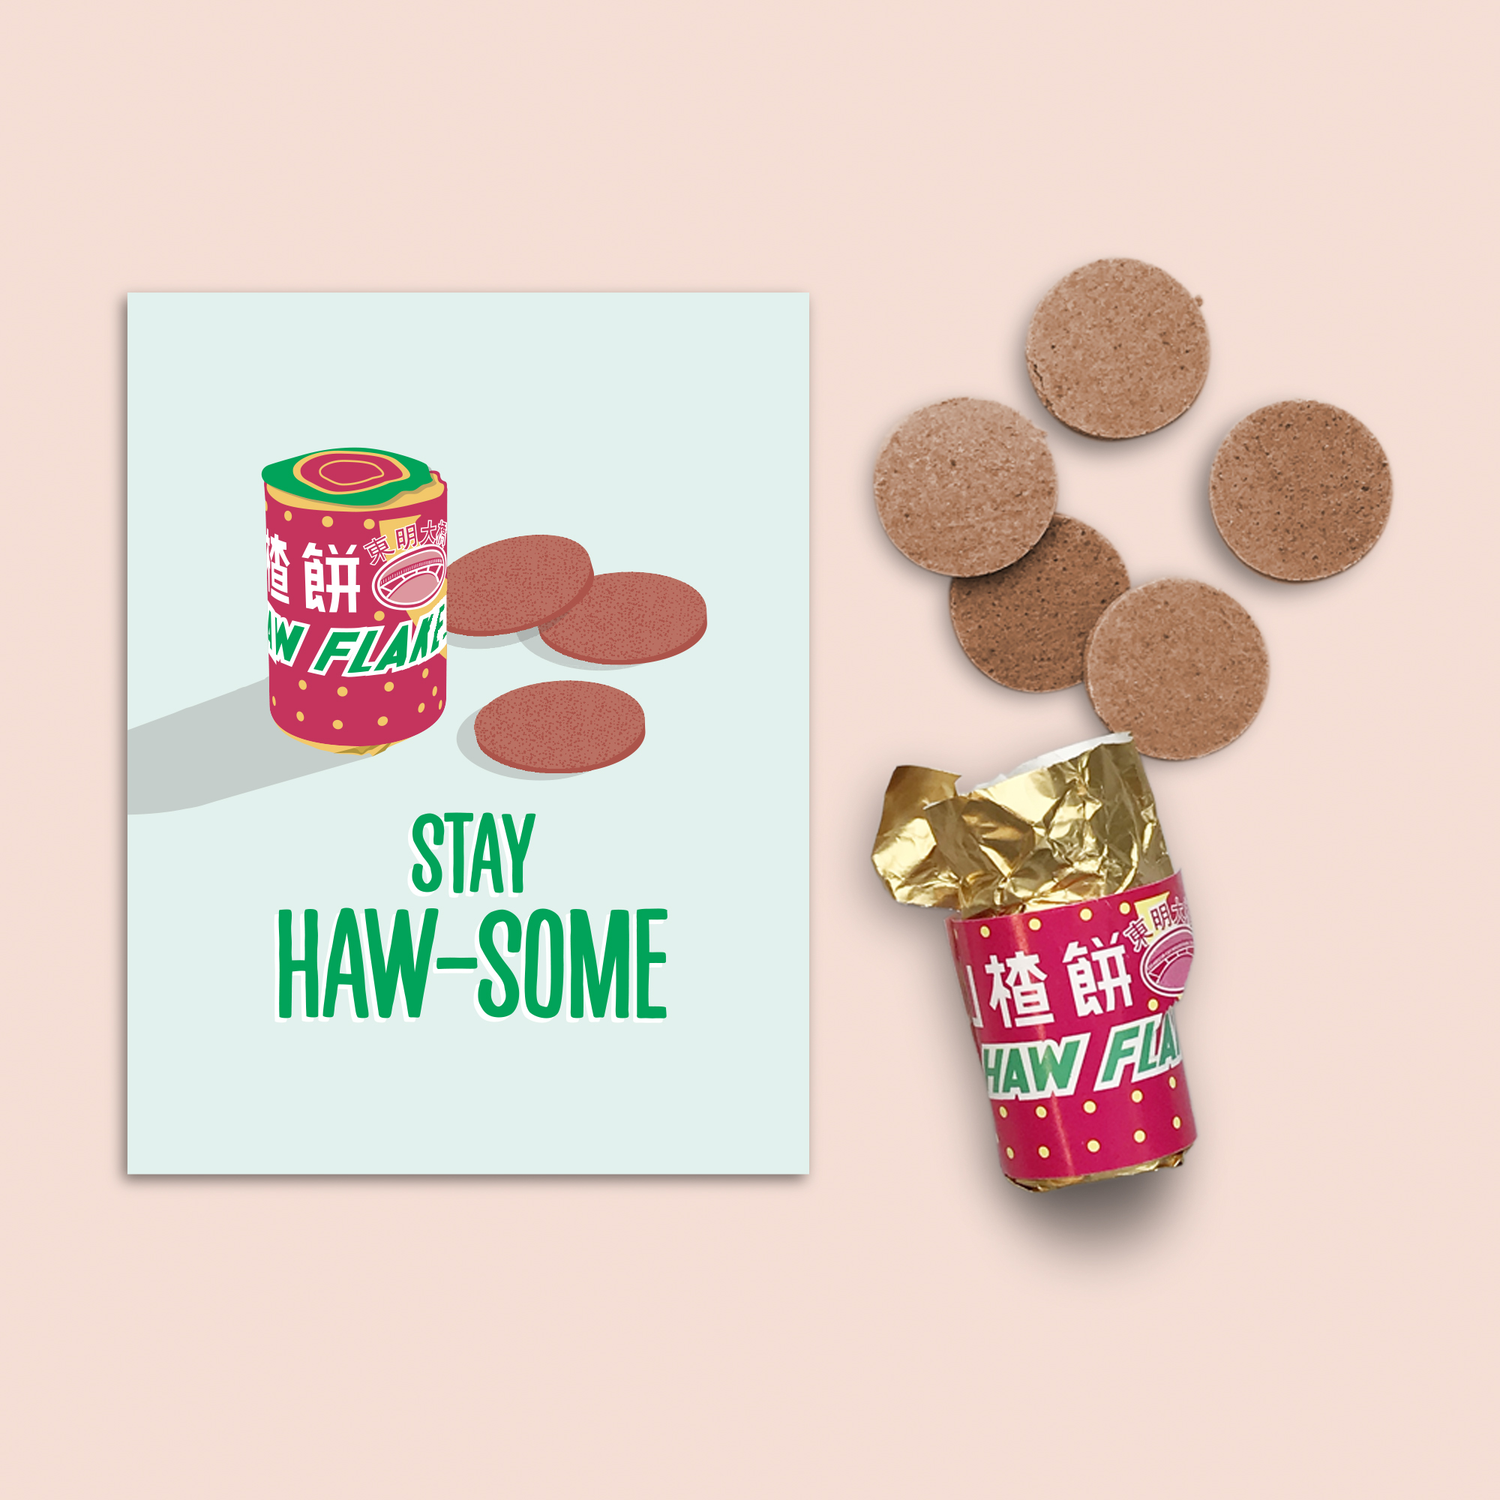 Stay haw-some haw flakes greeting card by I&